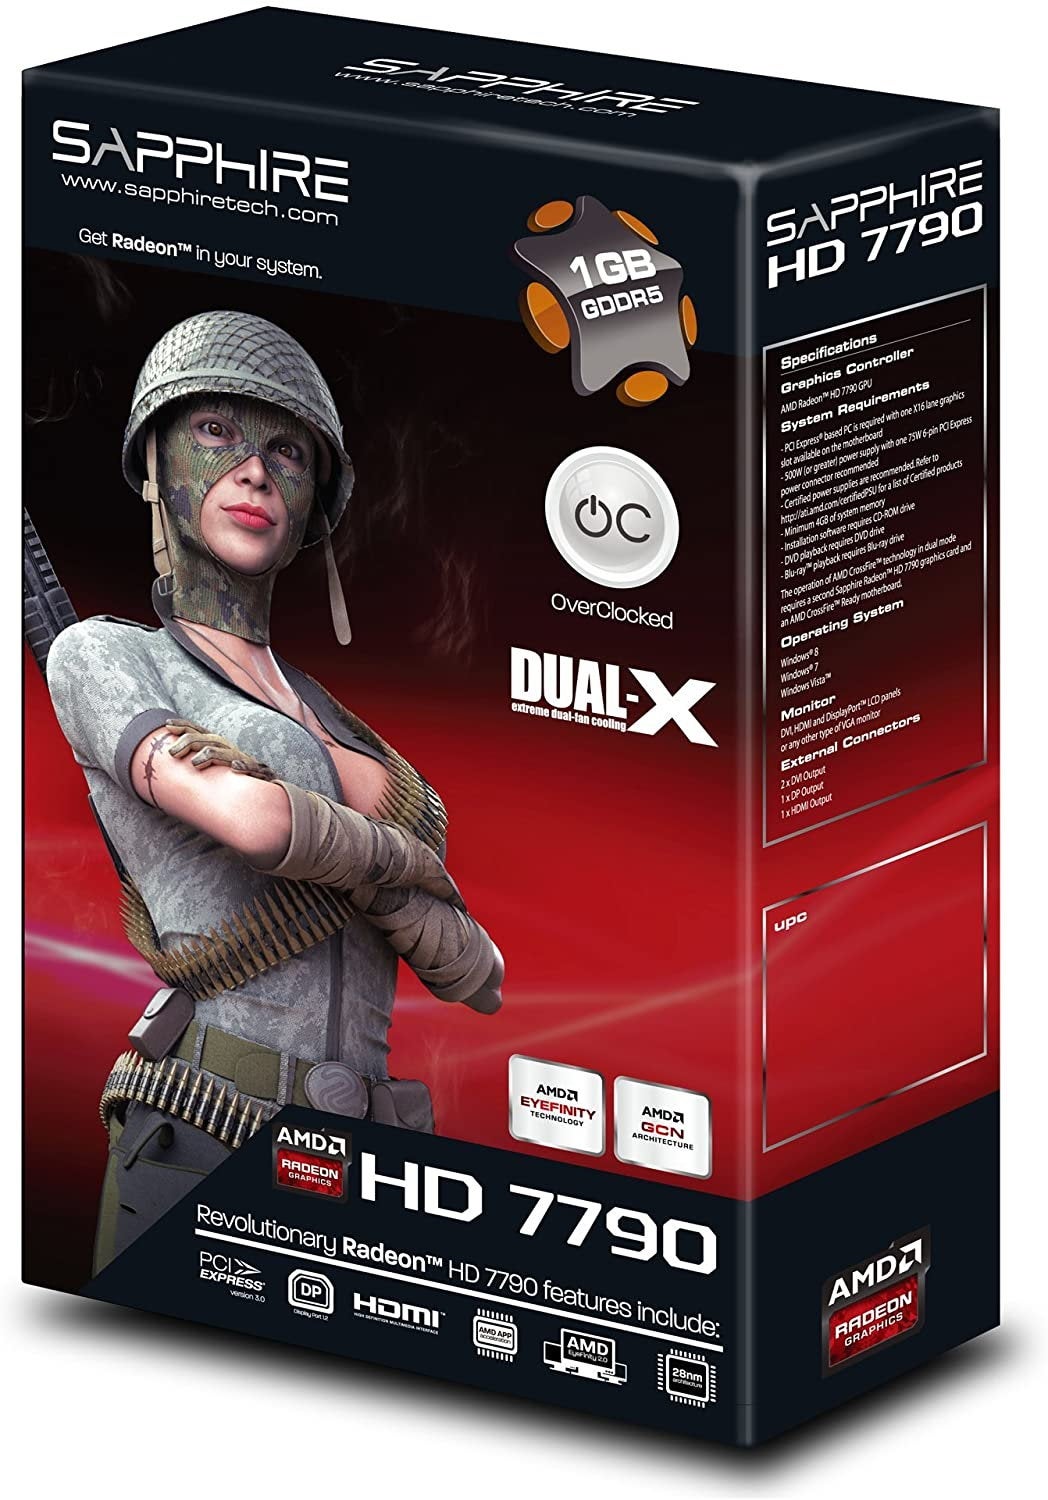 A graphics card box for Sapphire's Radeon HD 7790, depicting a woman in camo gear crossing her arms